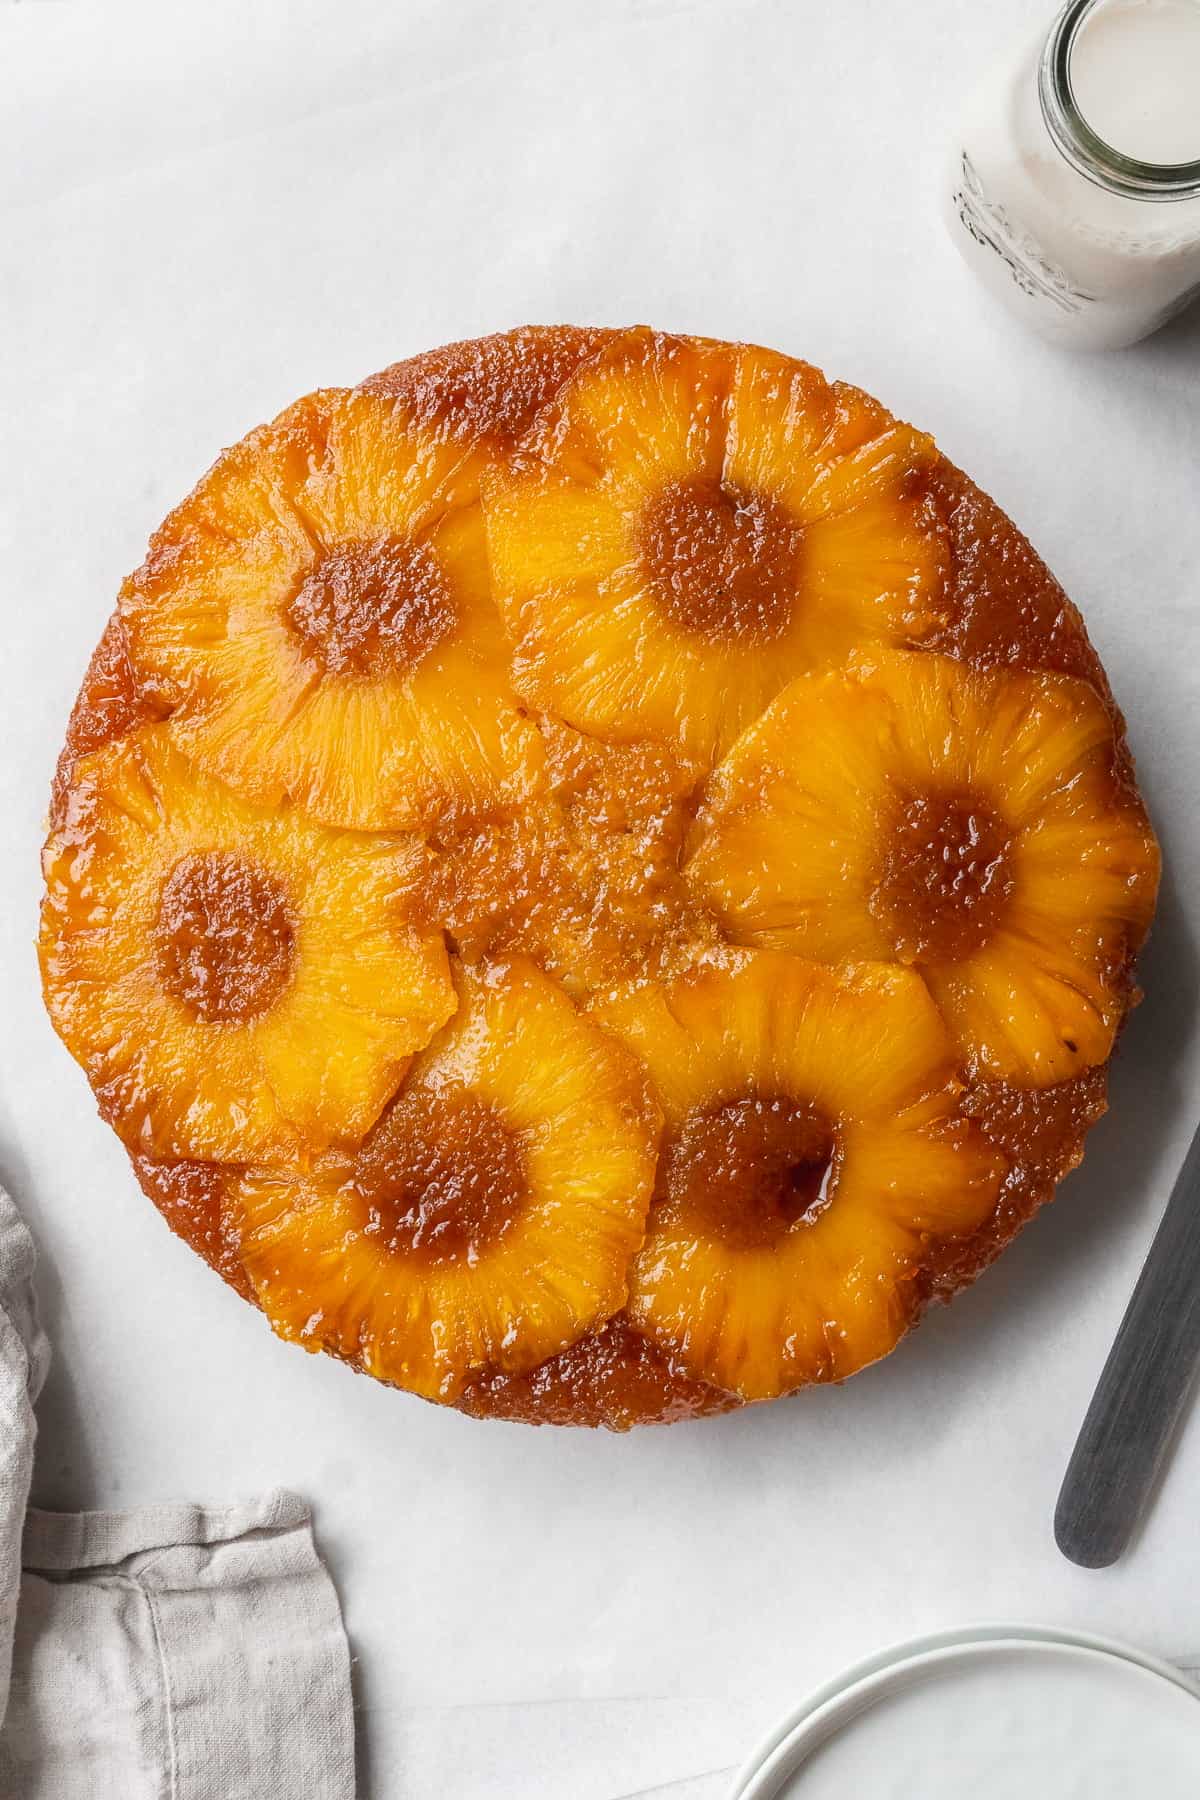 Pineapple upside down cake on the counter with napkins, a small bottle of milk.